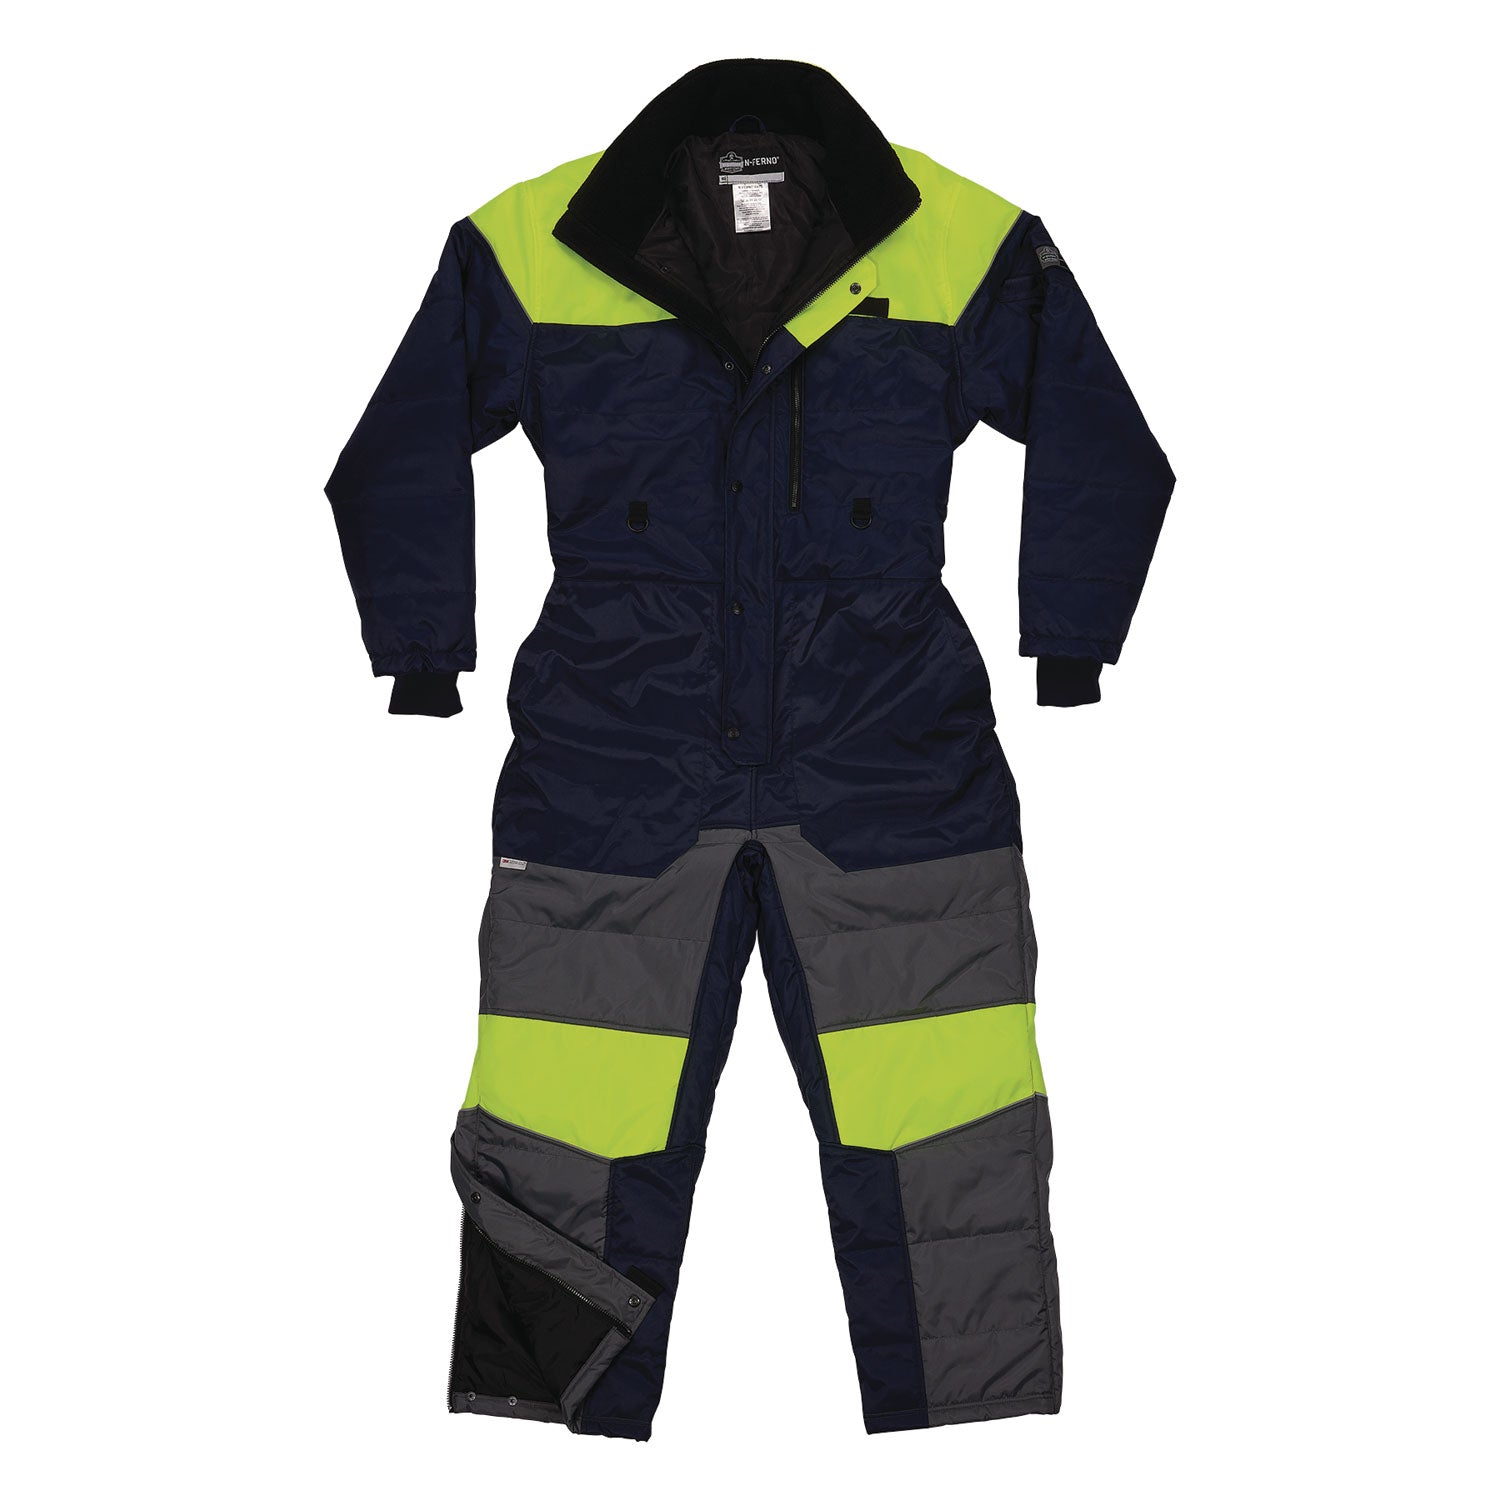 n-ferno-6475-insulated-freezer-coverall-x-small-navy-ships-in-1-3-business-days_ego41241 - 1